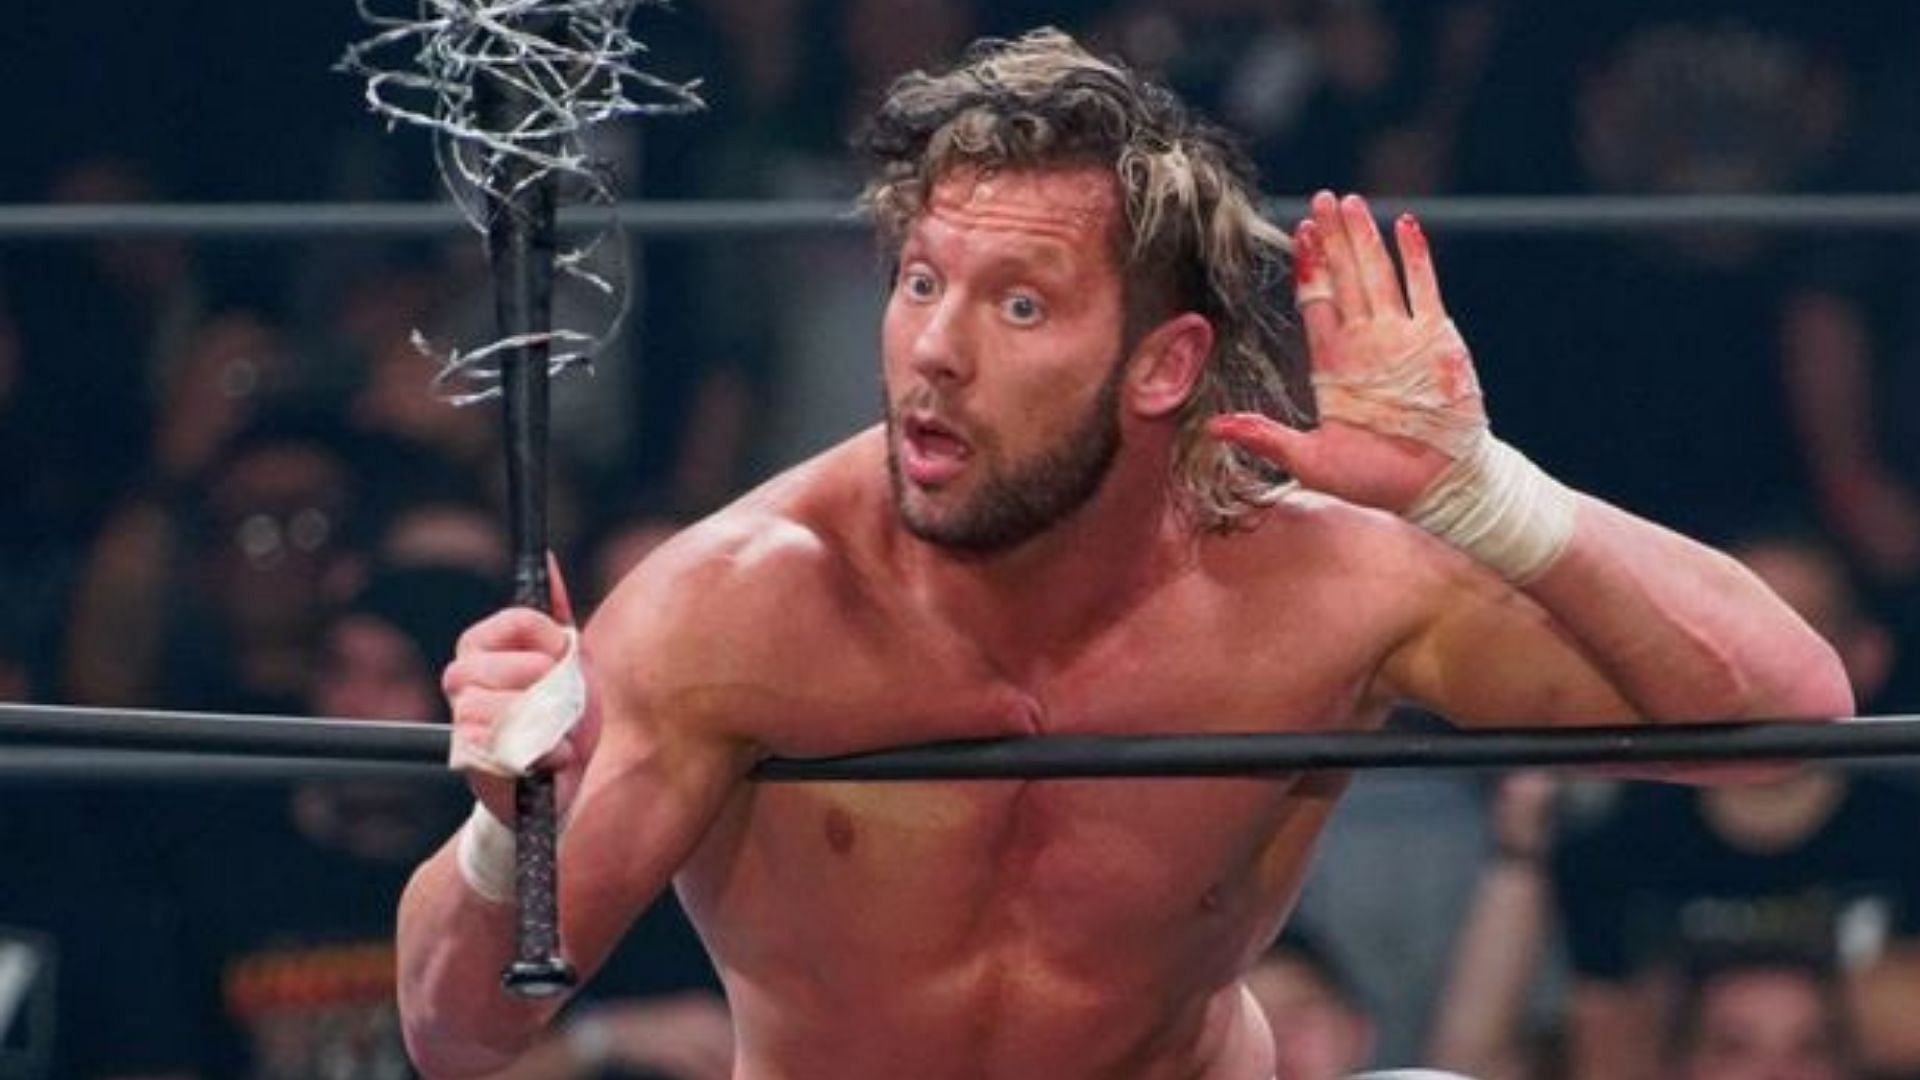 Kenny Omega performing at AEW Full Gear 2019